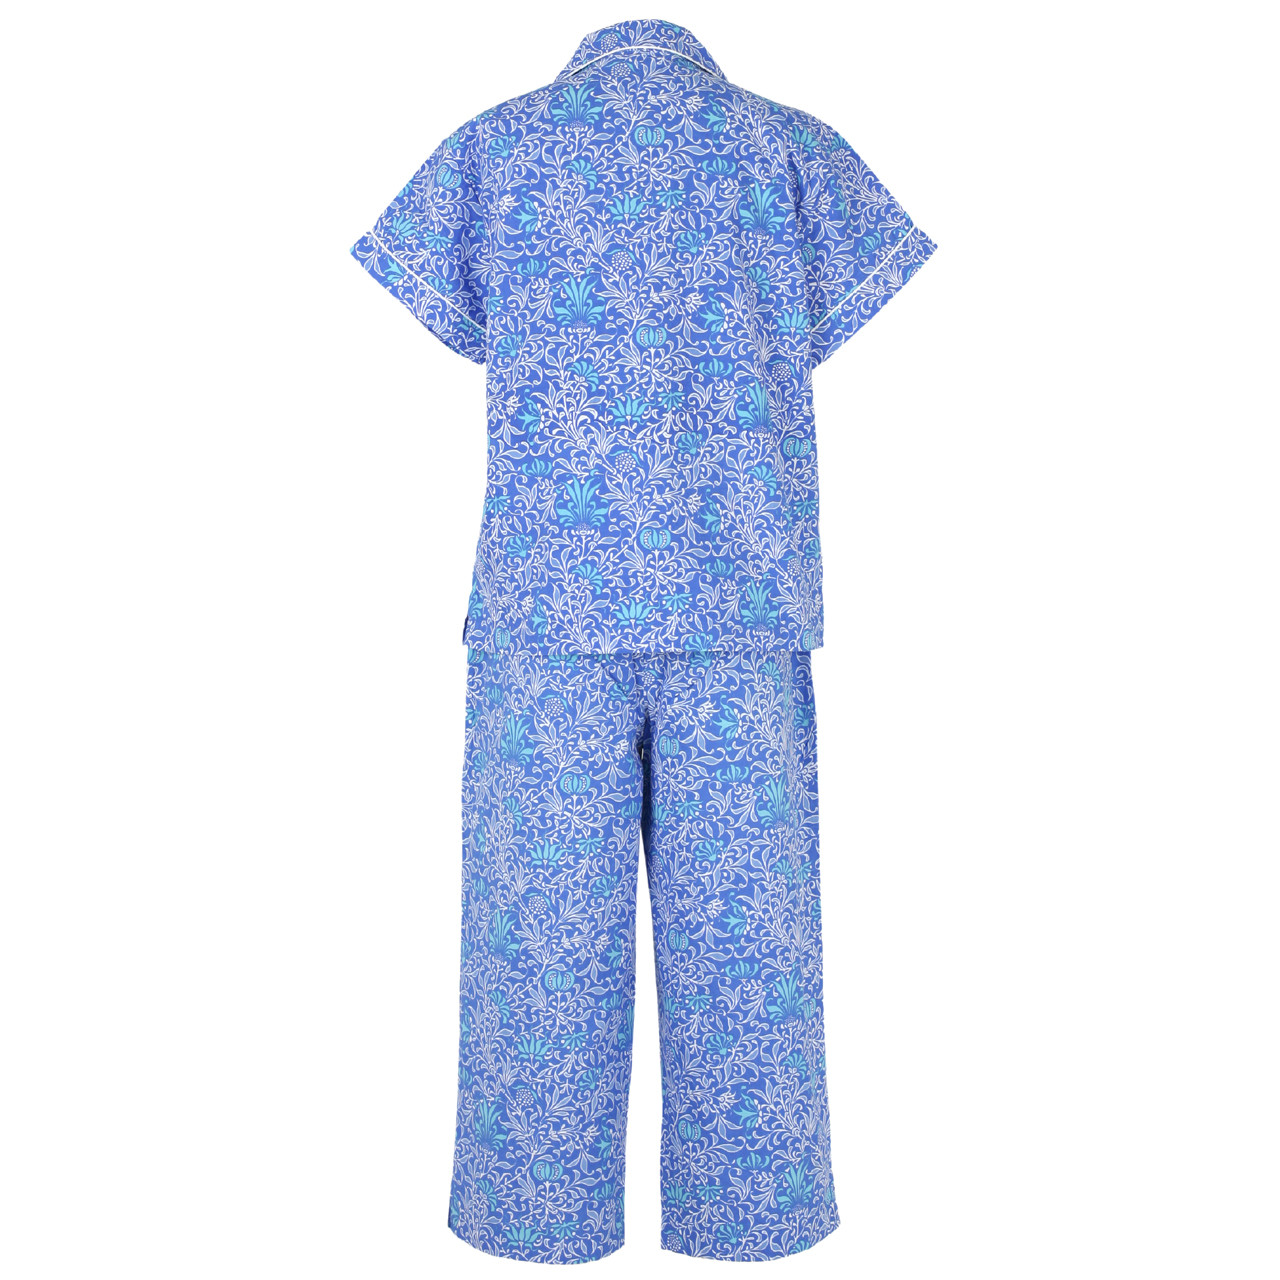 Topshop cotton poplin piped shirt and pants pajama set in blue